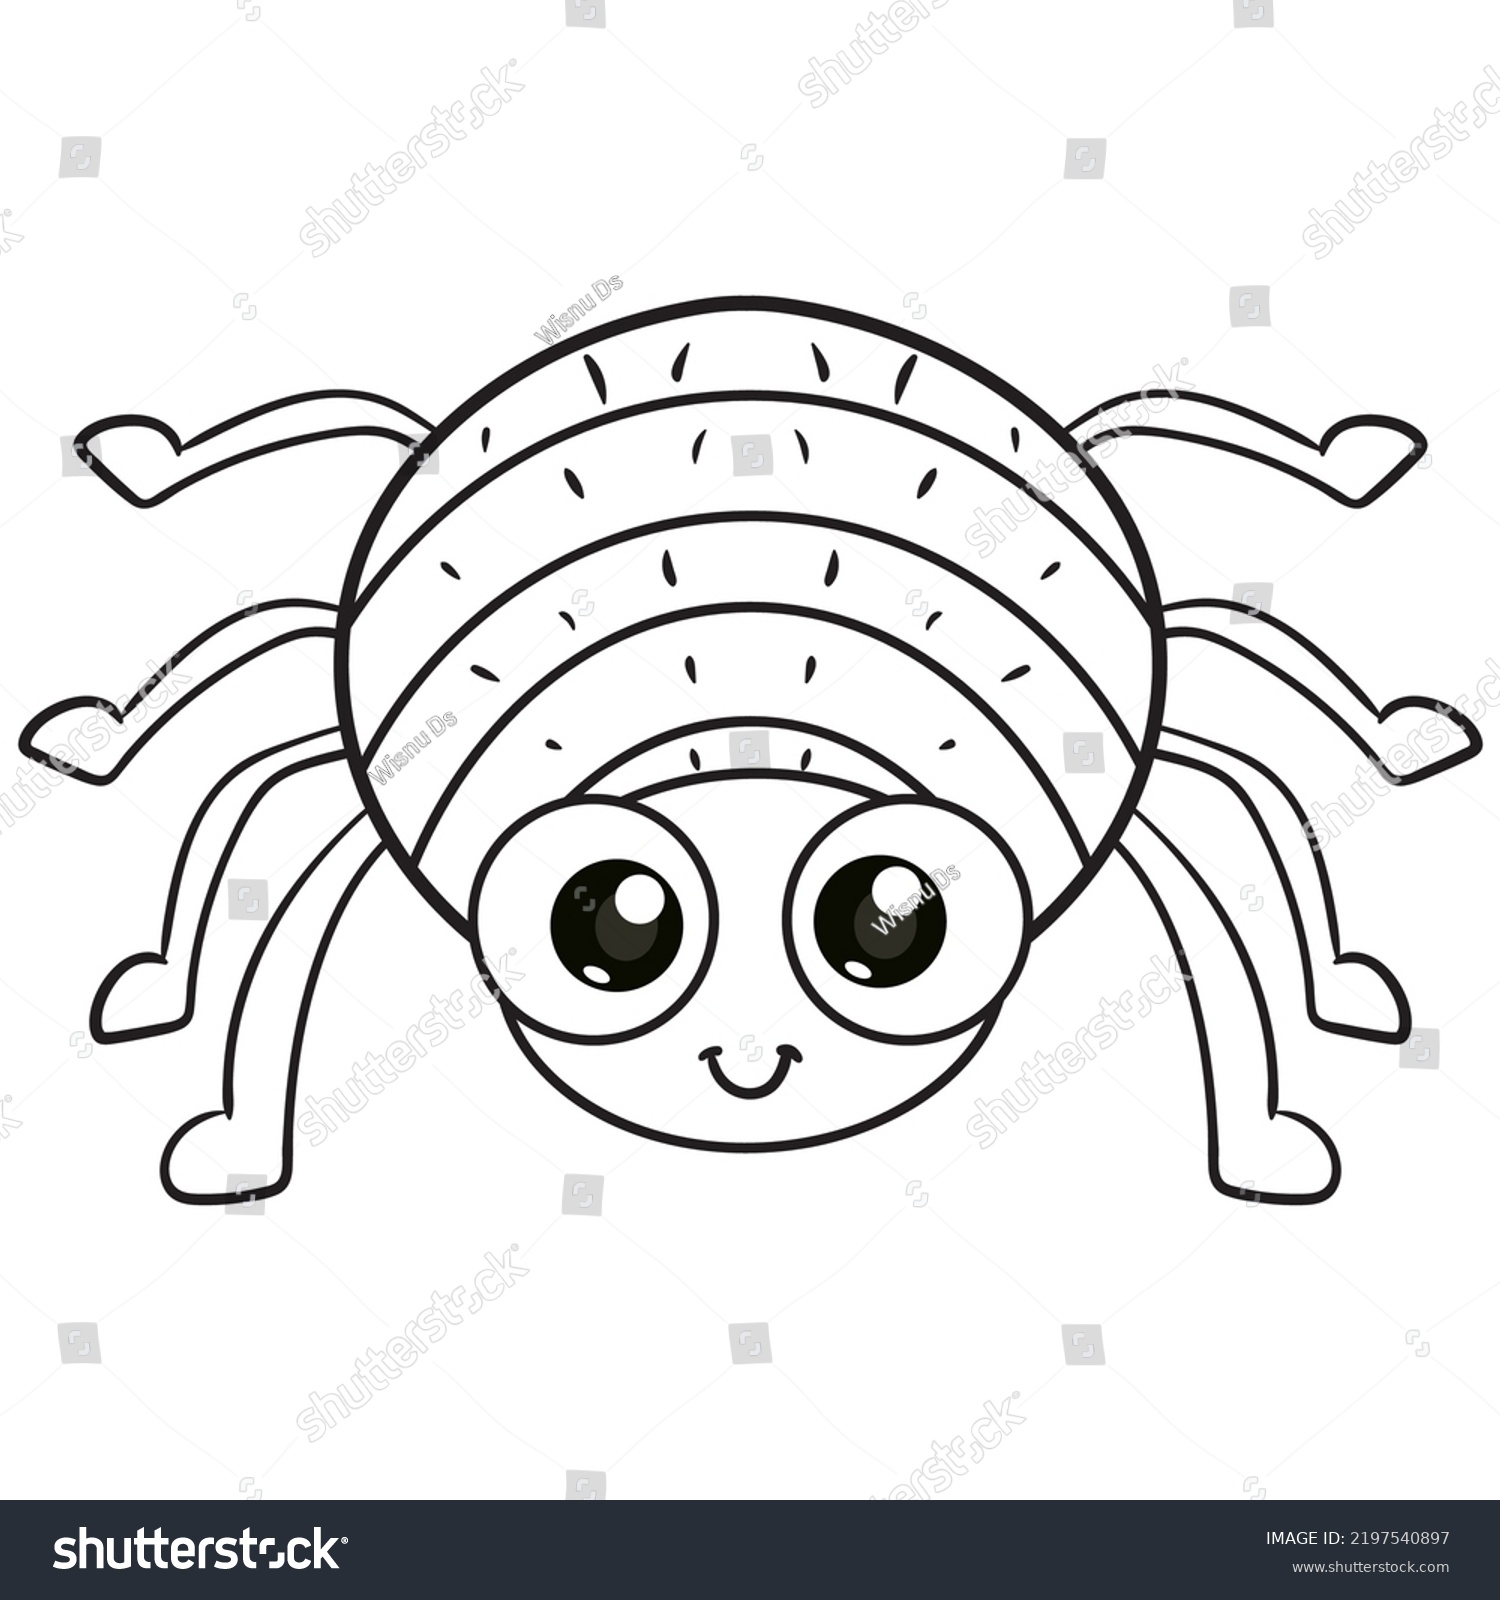 Coloring pages books kids cute spider stock vector royalty free